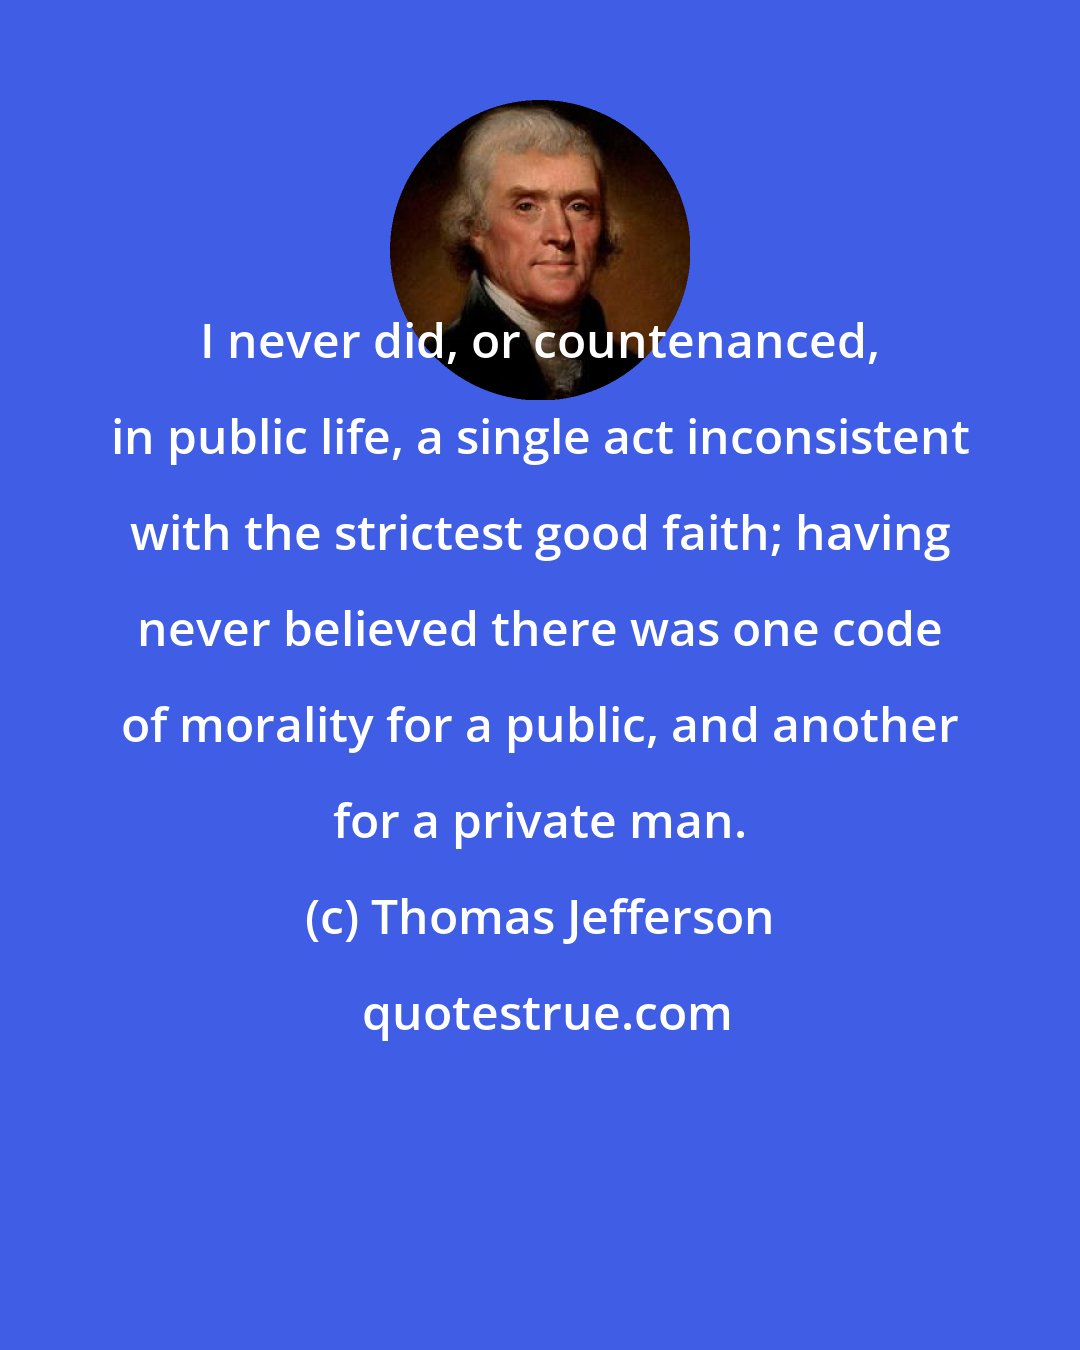 Thomas Jefferson: I never did, or countenanced, in public life, a single act inconsistent with the strictest good faith; having never believed there was one code of morality for a public, and another for a private man.